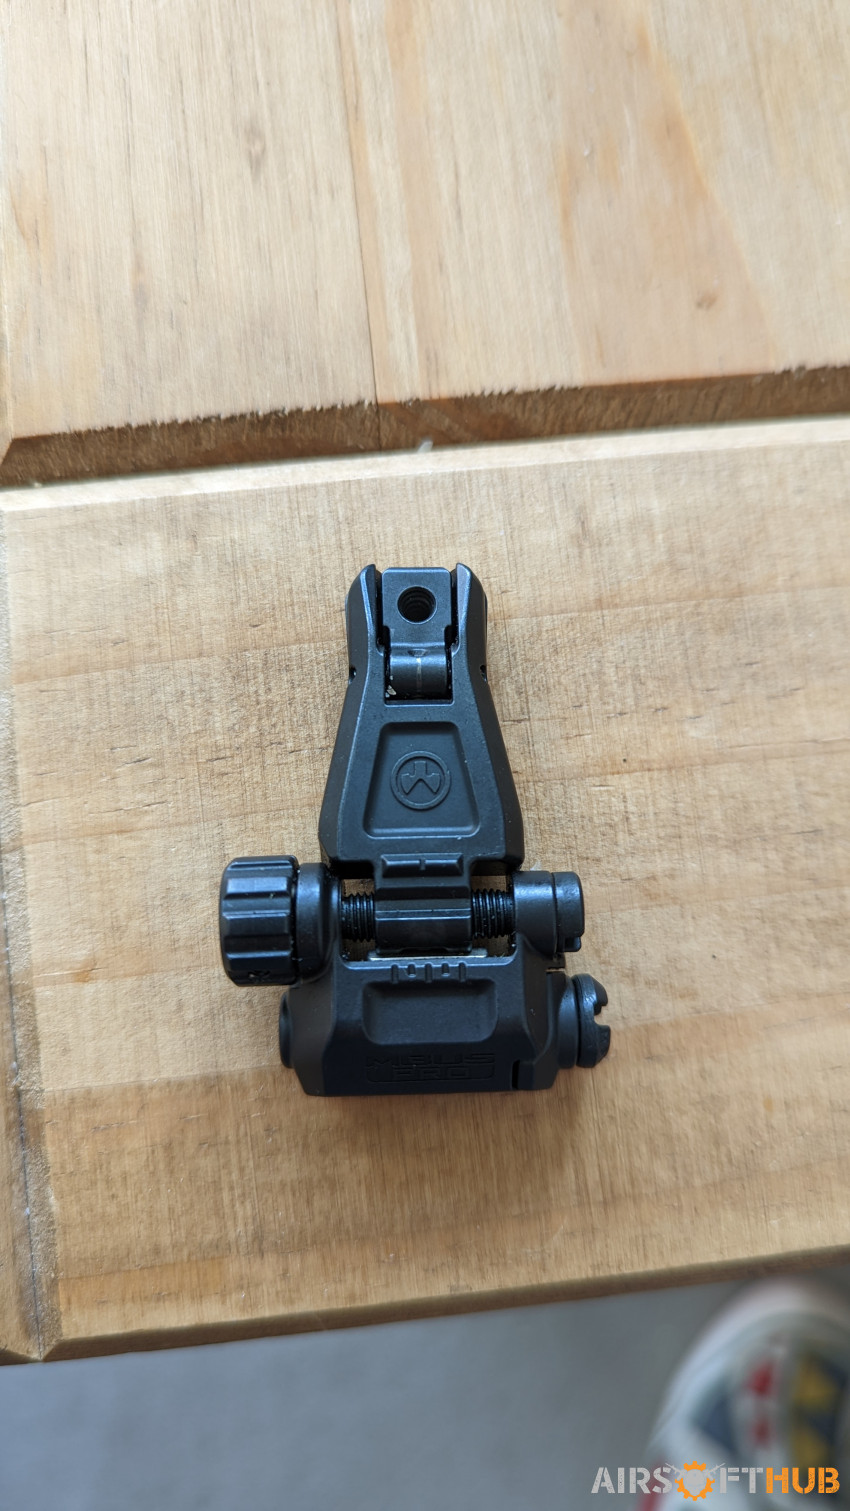 Magpul MBUS Pro Rear Sight - Used airsoft equipment